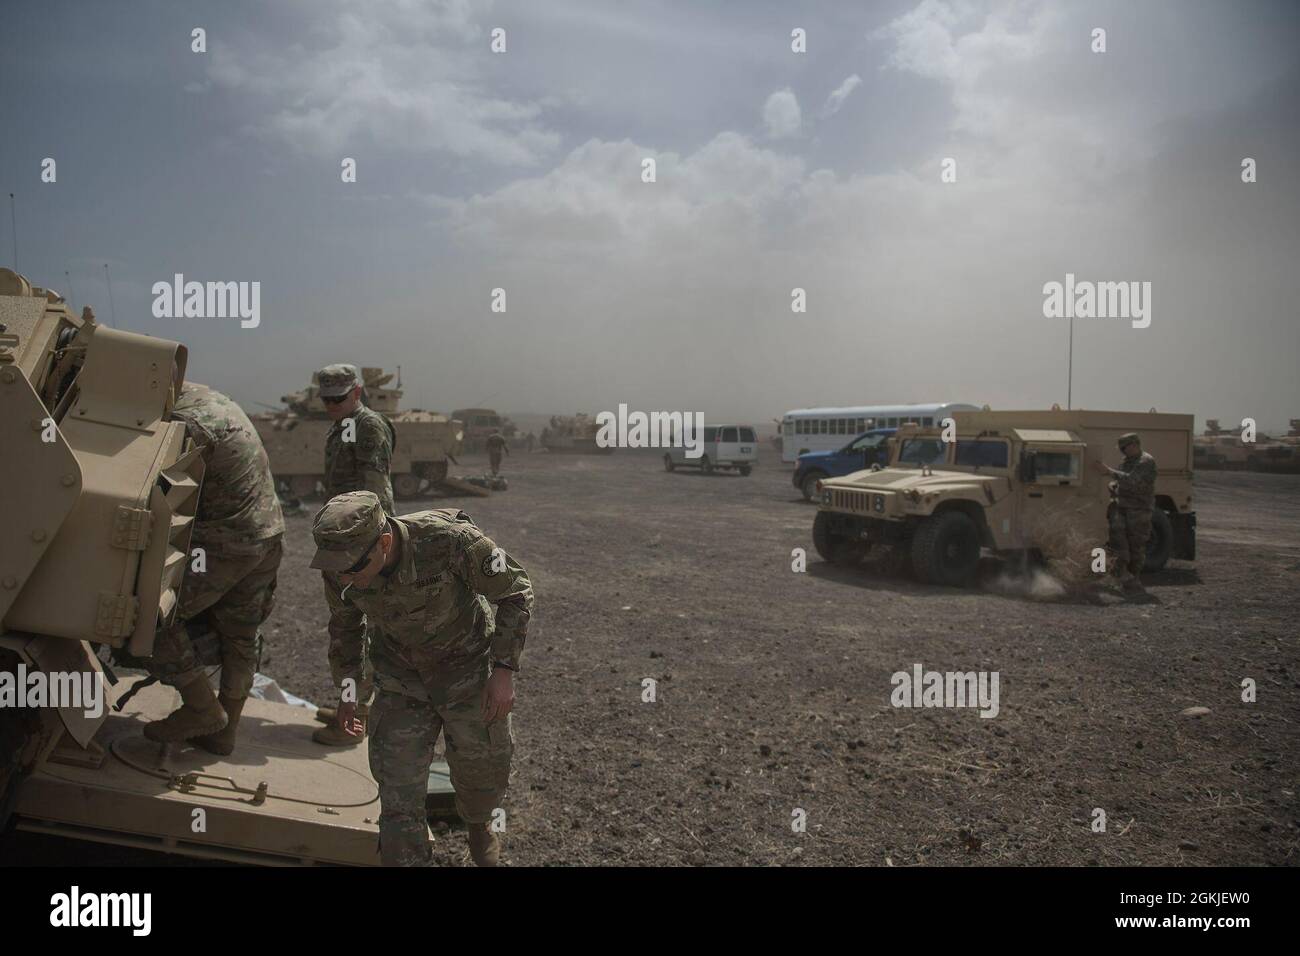 During Charlie Company’s afternoon preparations, a sudden storm blew in across the desert and enveloped the soldiers and equipment in the compound. A sand storm sent soldiers running for cover and hurriedly dragging equipment and belongings into tracked vehicles for protection. Winds were clocked at over 30 mph with frequent gusts as high as 55 mph.    Charlie Company from the 116th Cavalry Brigade Combat Team began annual training on the morning of May 1, 2021 and returned from the Orchard Combat Training Center on the evening of May 13.  The men and women of C Company completed a successful Stock Photo